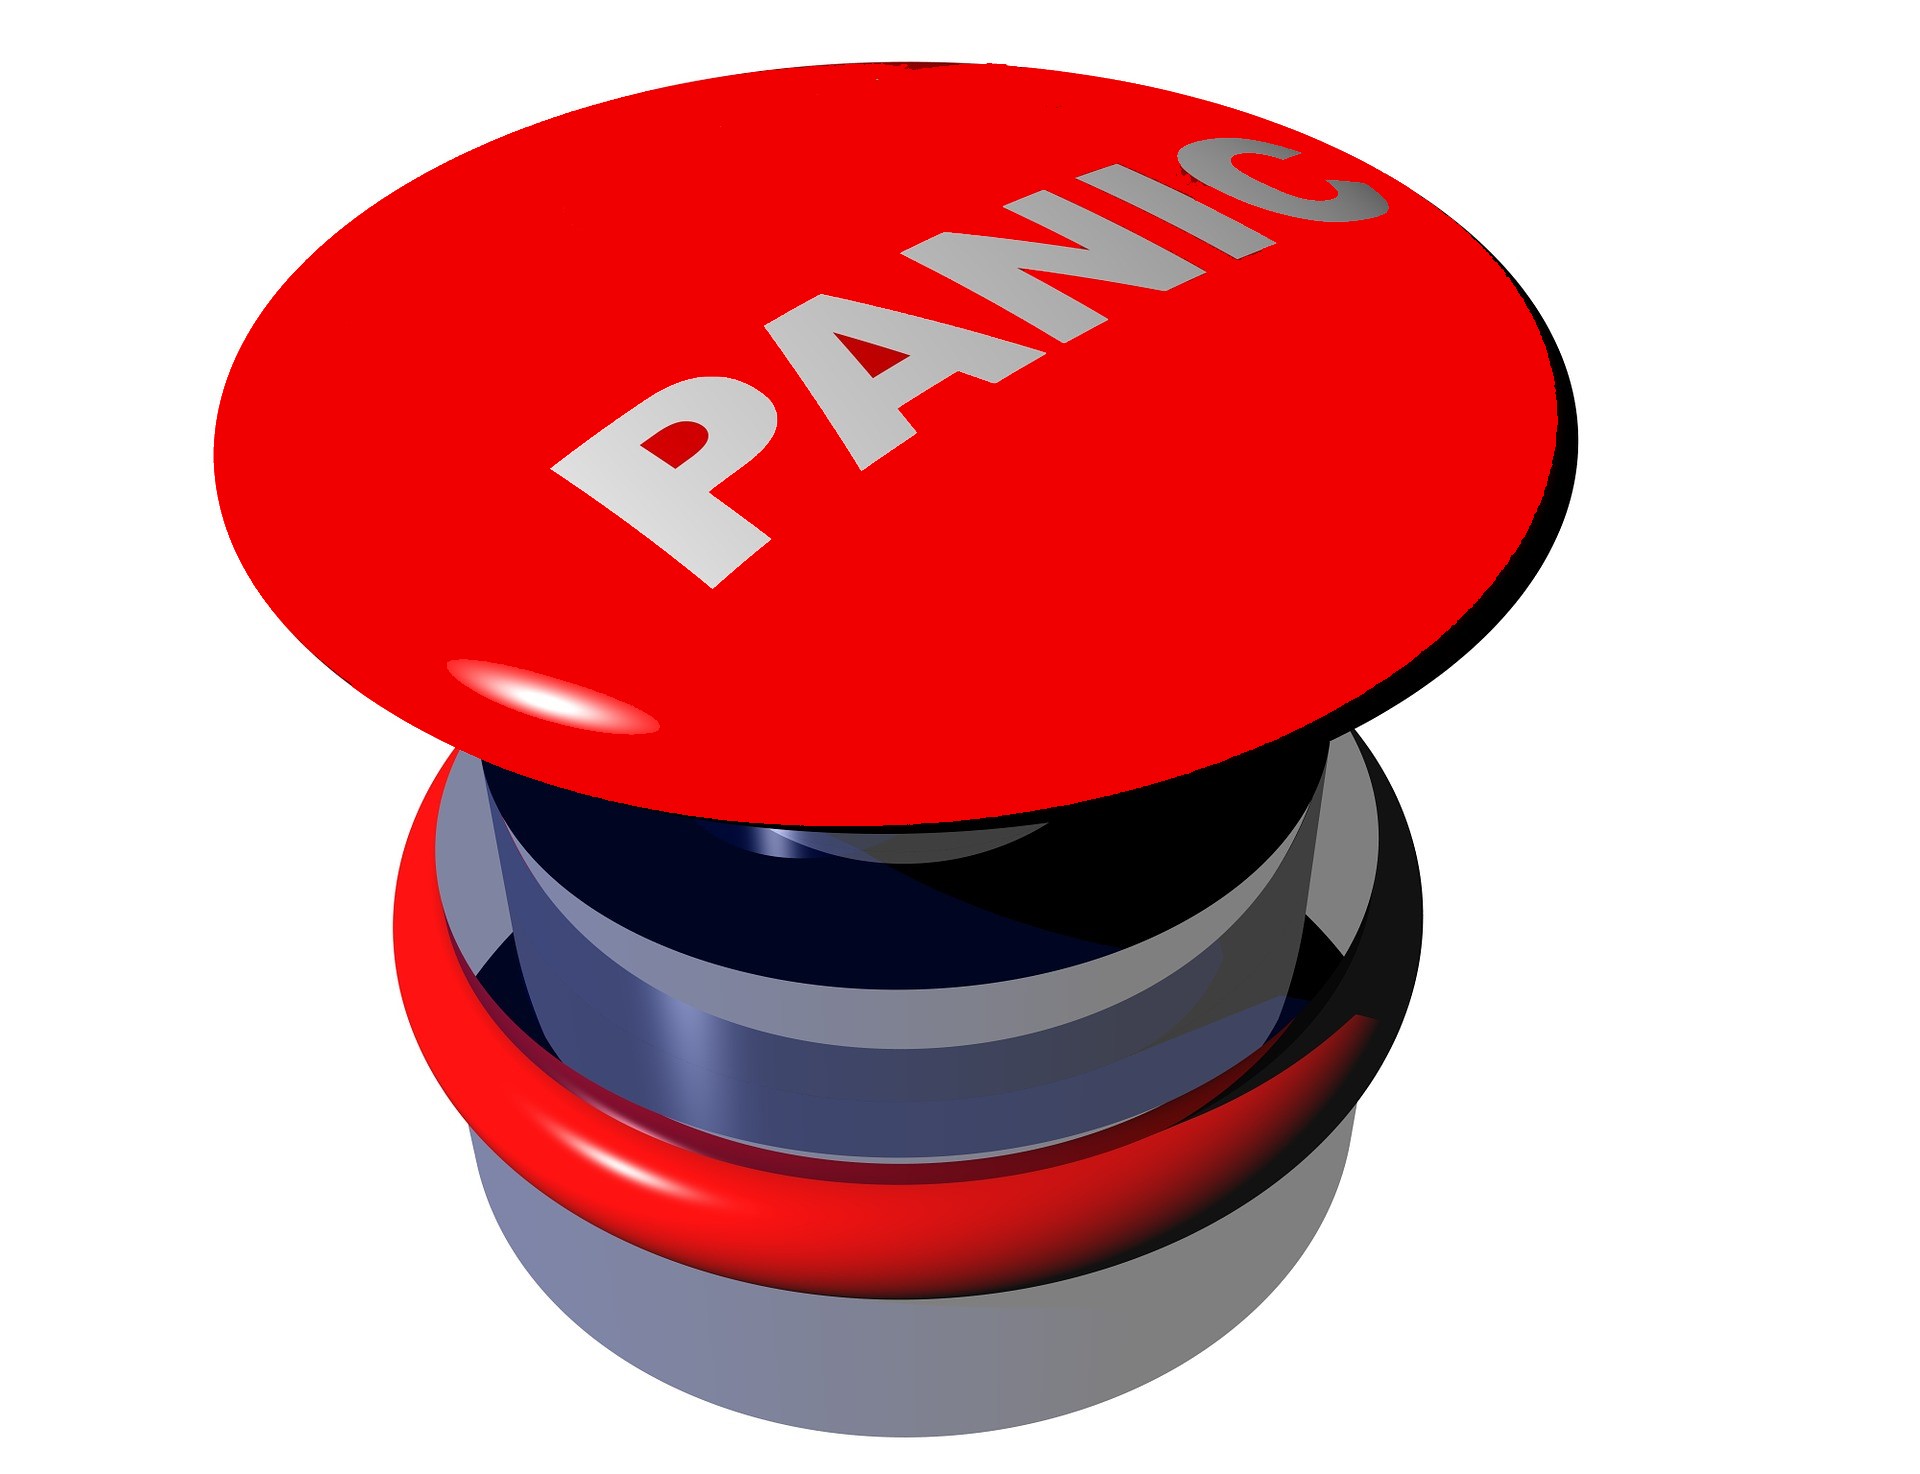 A red button with the word "panic" on it